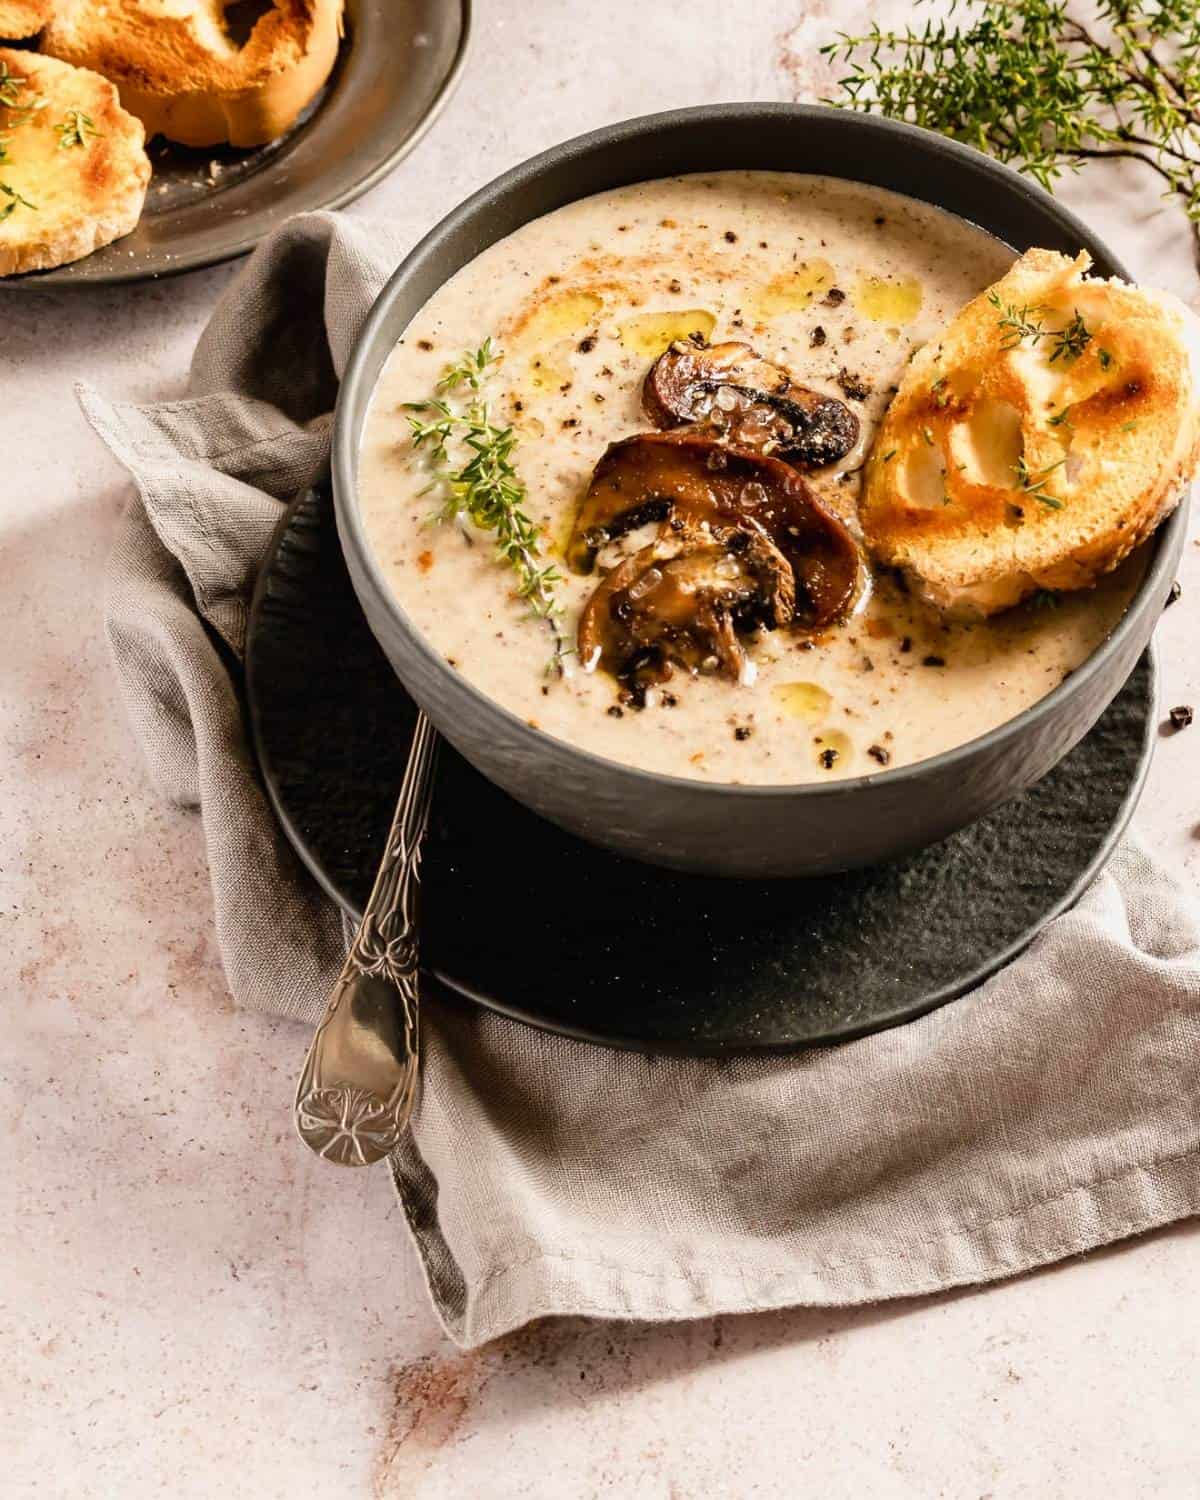 A Mushrooms soup in a dark bowl on a beige linen and marble table. The dish is garnished with Mushroom and black pepper. On the side a spoon and some roasted slices of bread